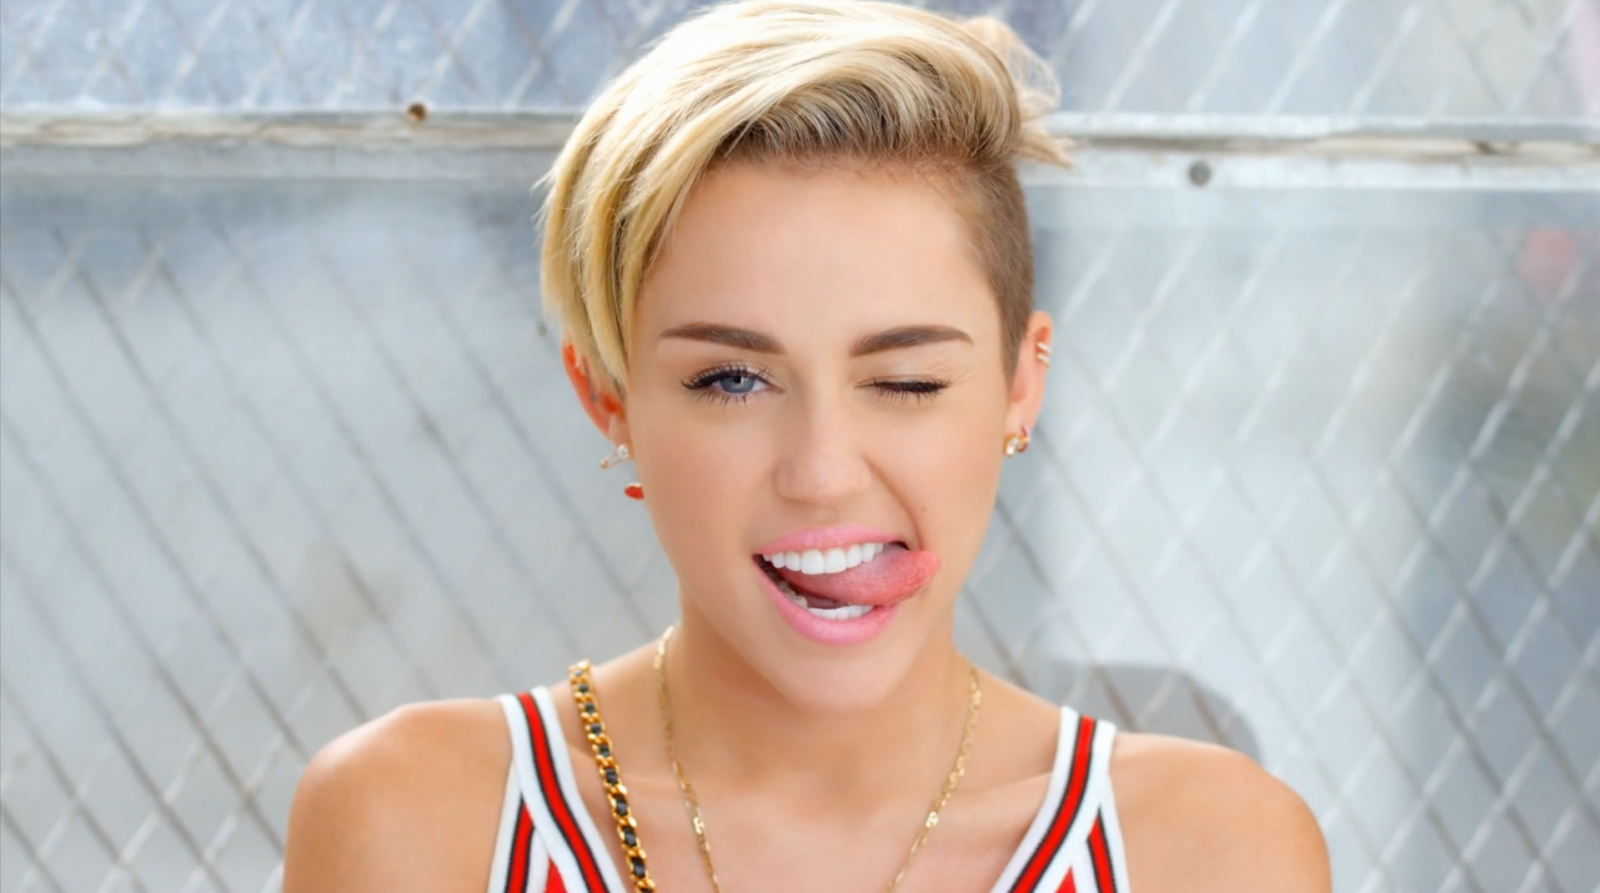 Miley Cyrus Photographed Nude In Bed 'Doing A Threesome' [LOOK] - The Trent